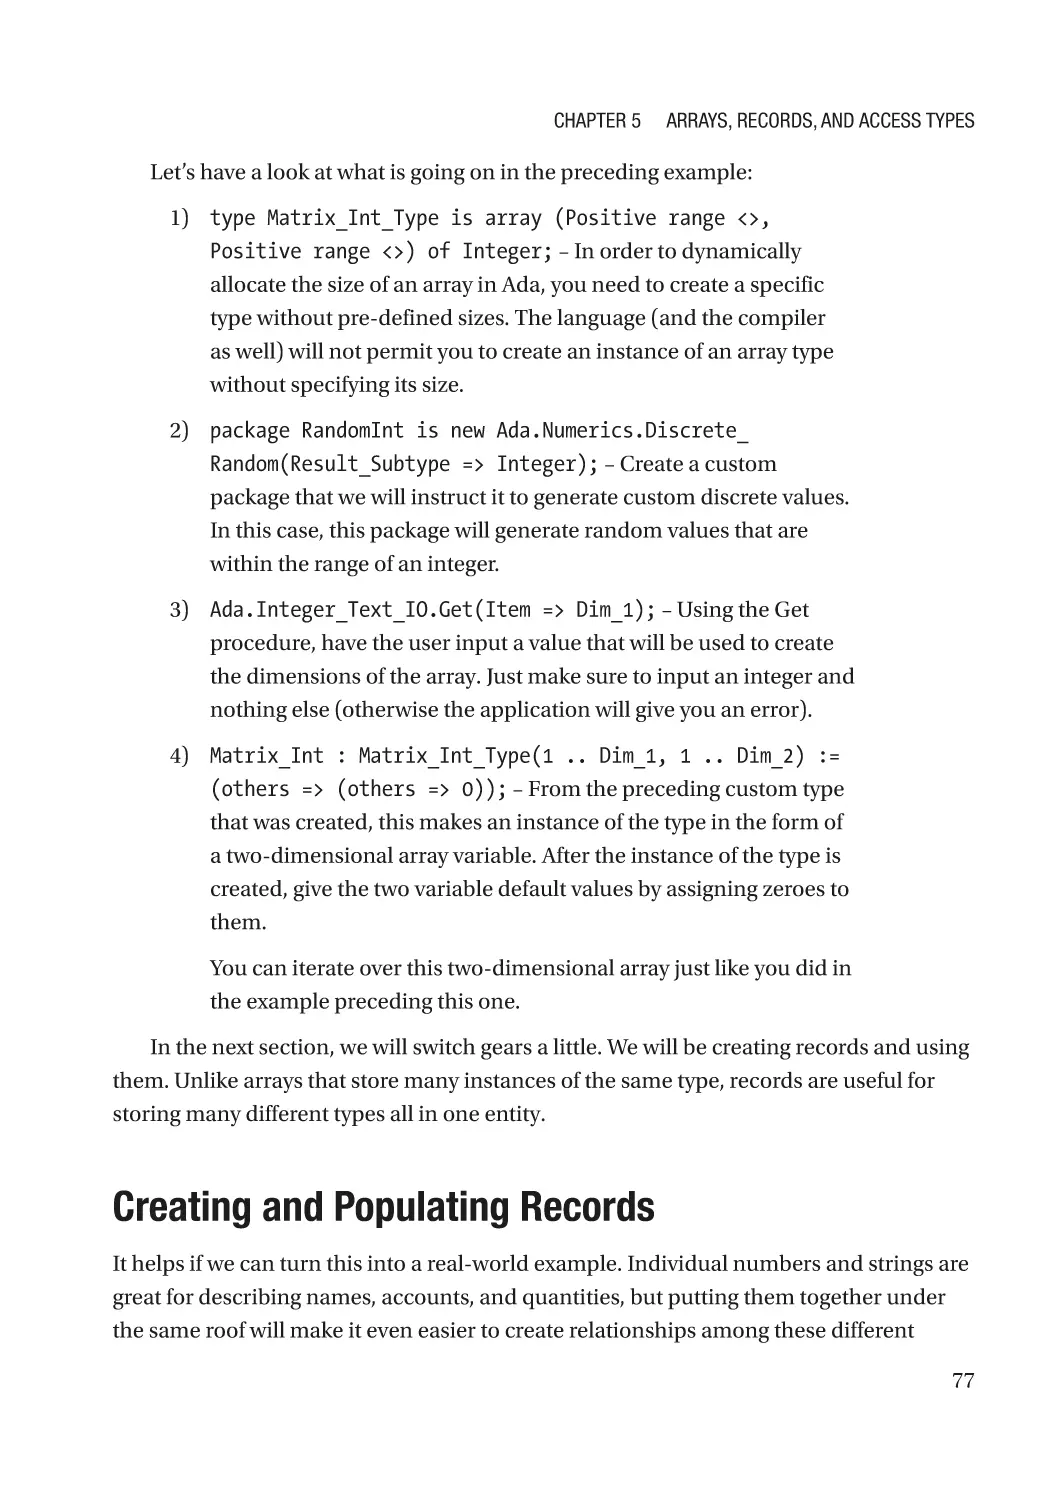 Creating and Populating Records